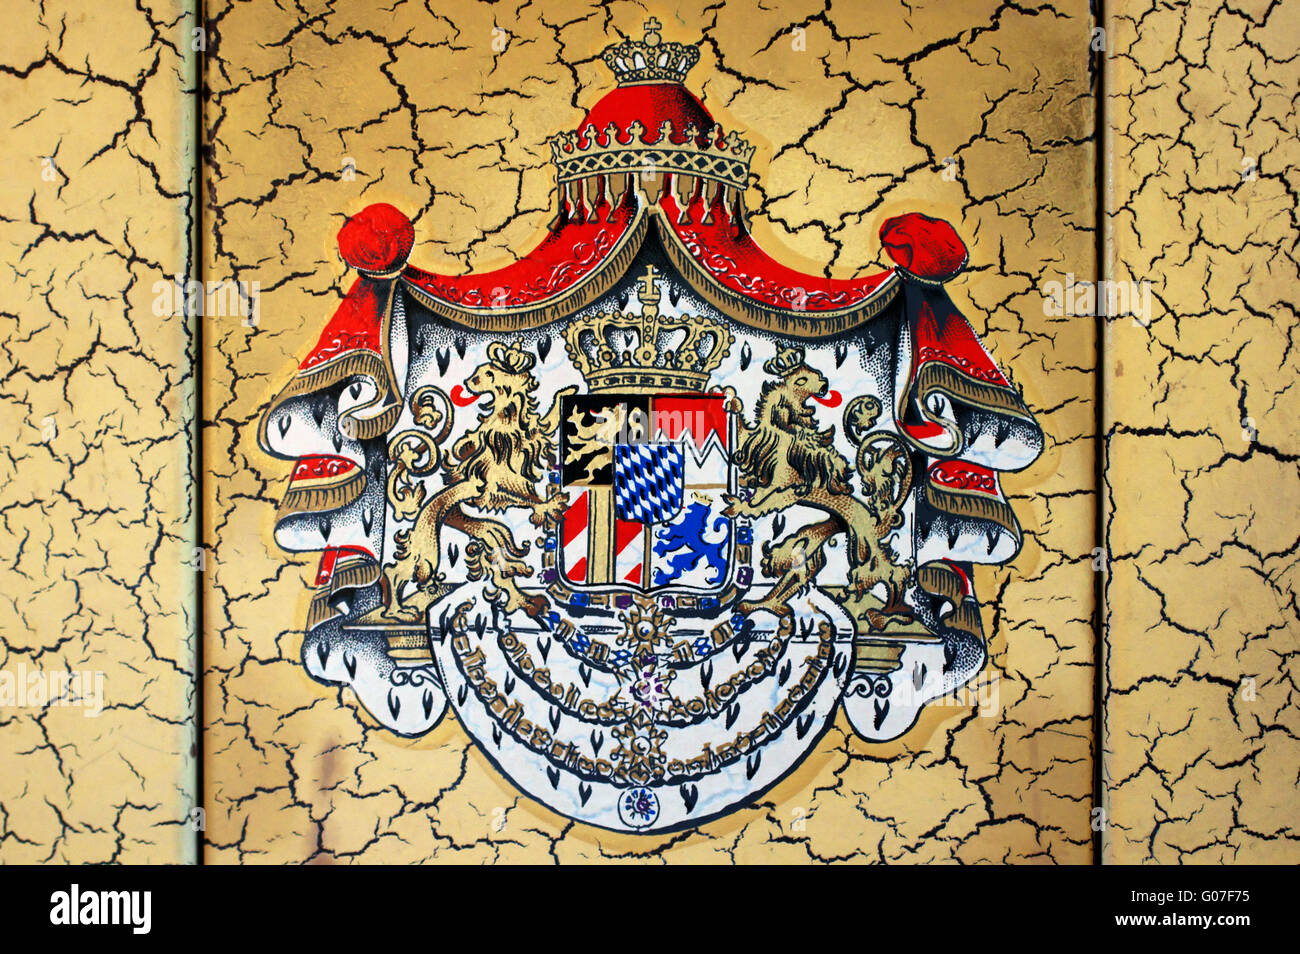 Bavarian king's coat of arms Stock Photo